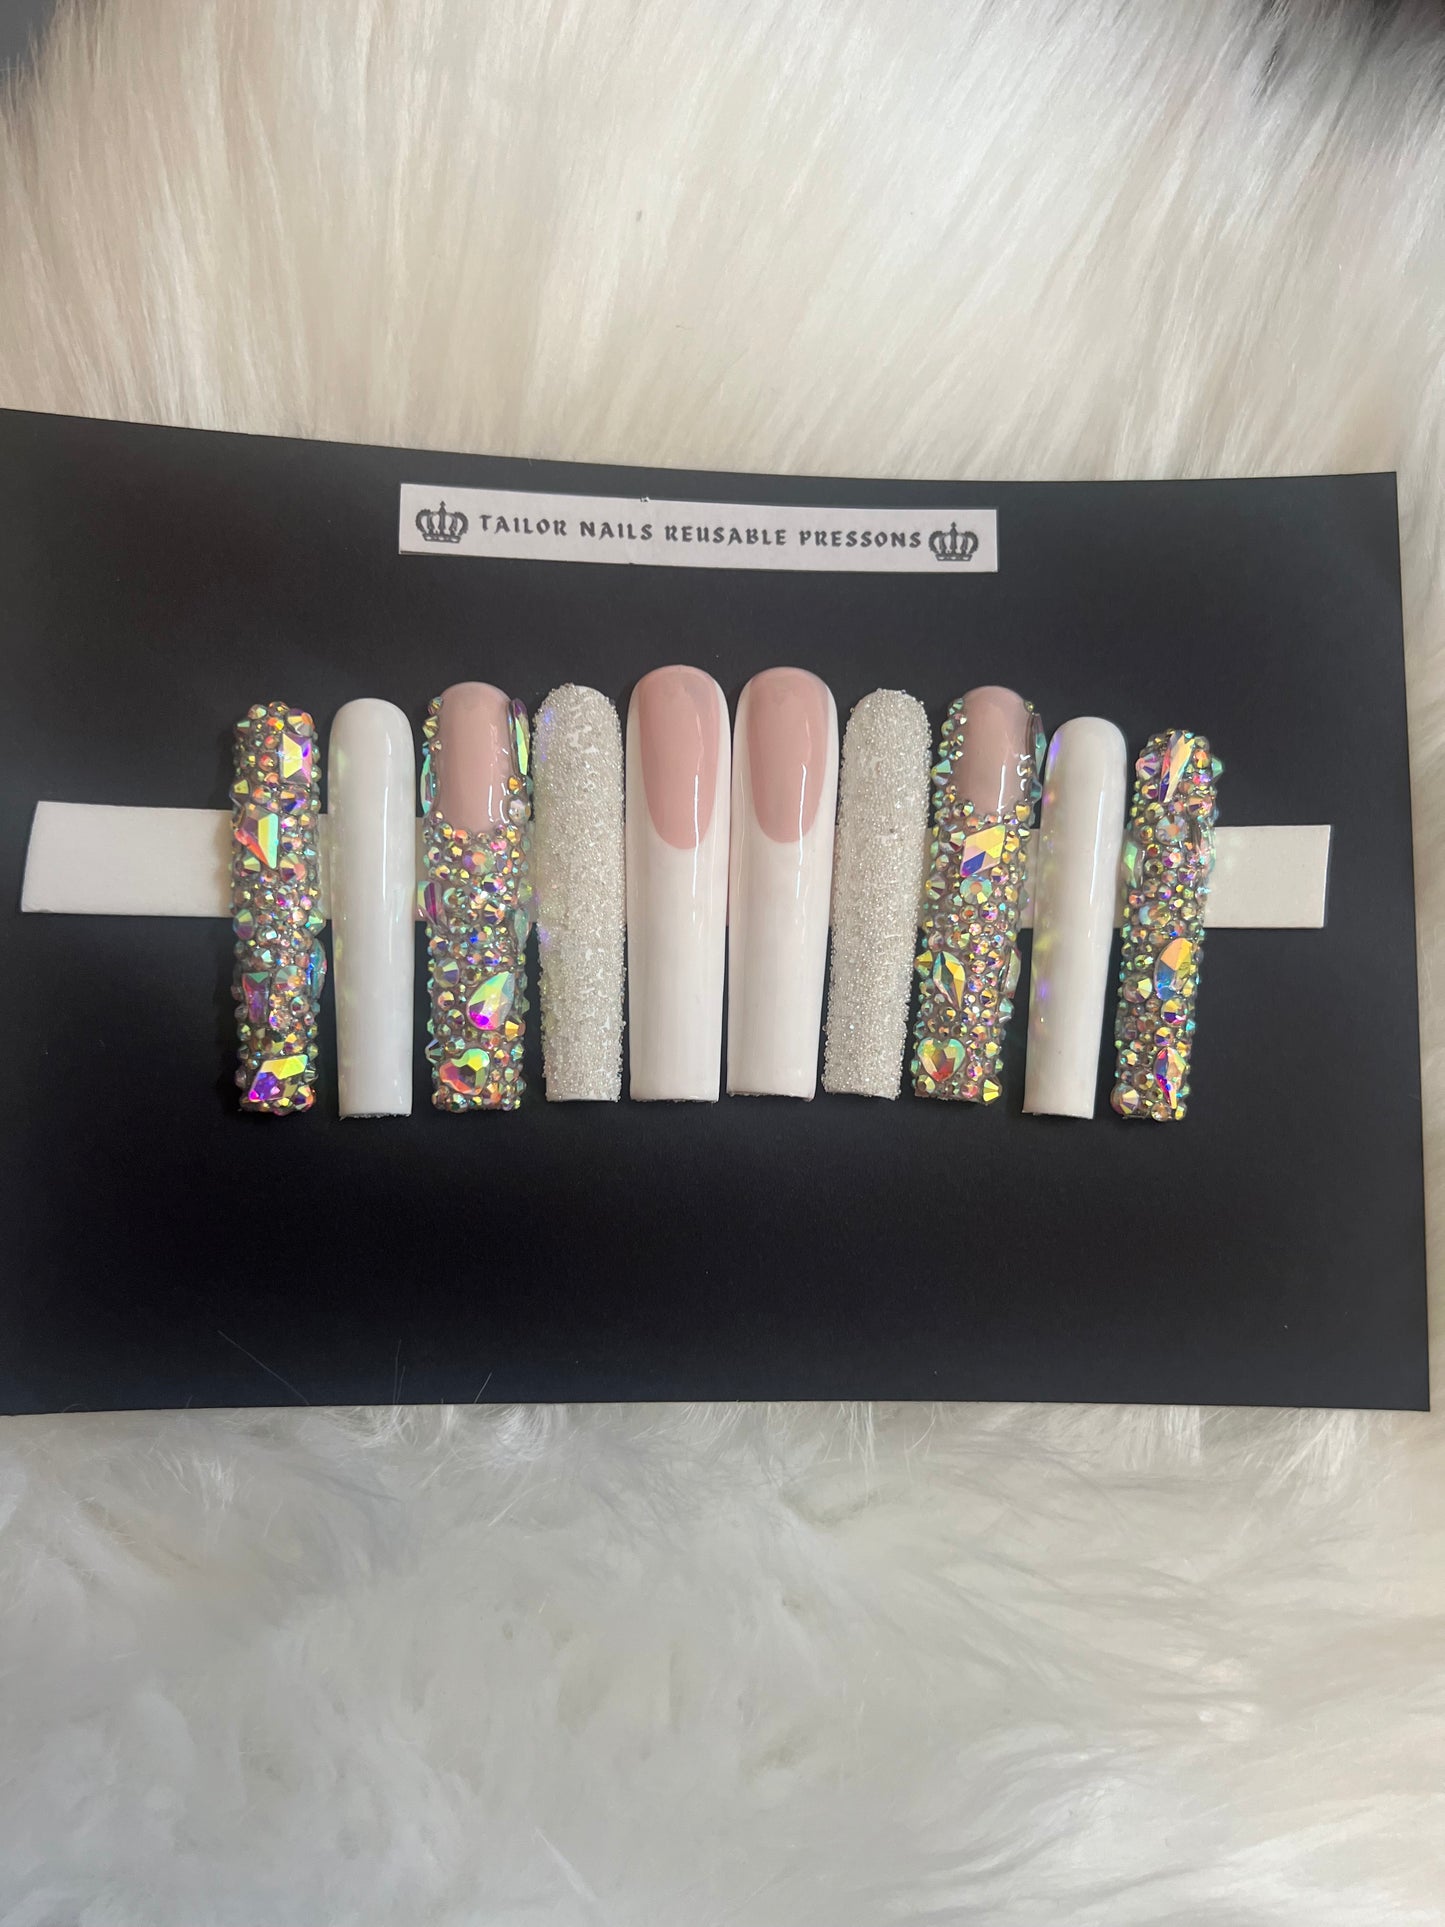 XXL Blinged Out French Tip Nails (size required)